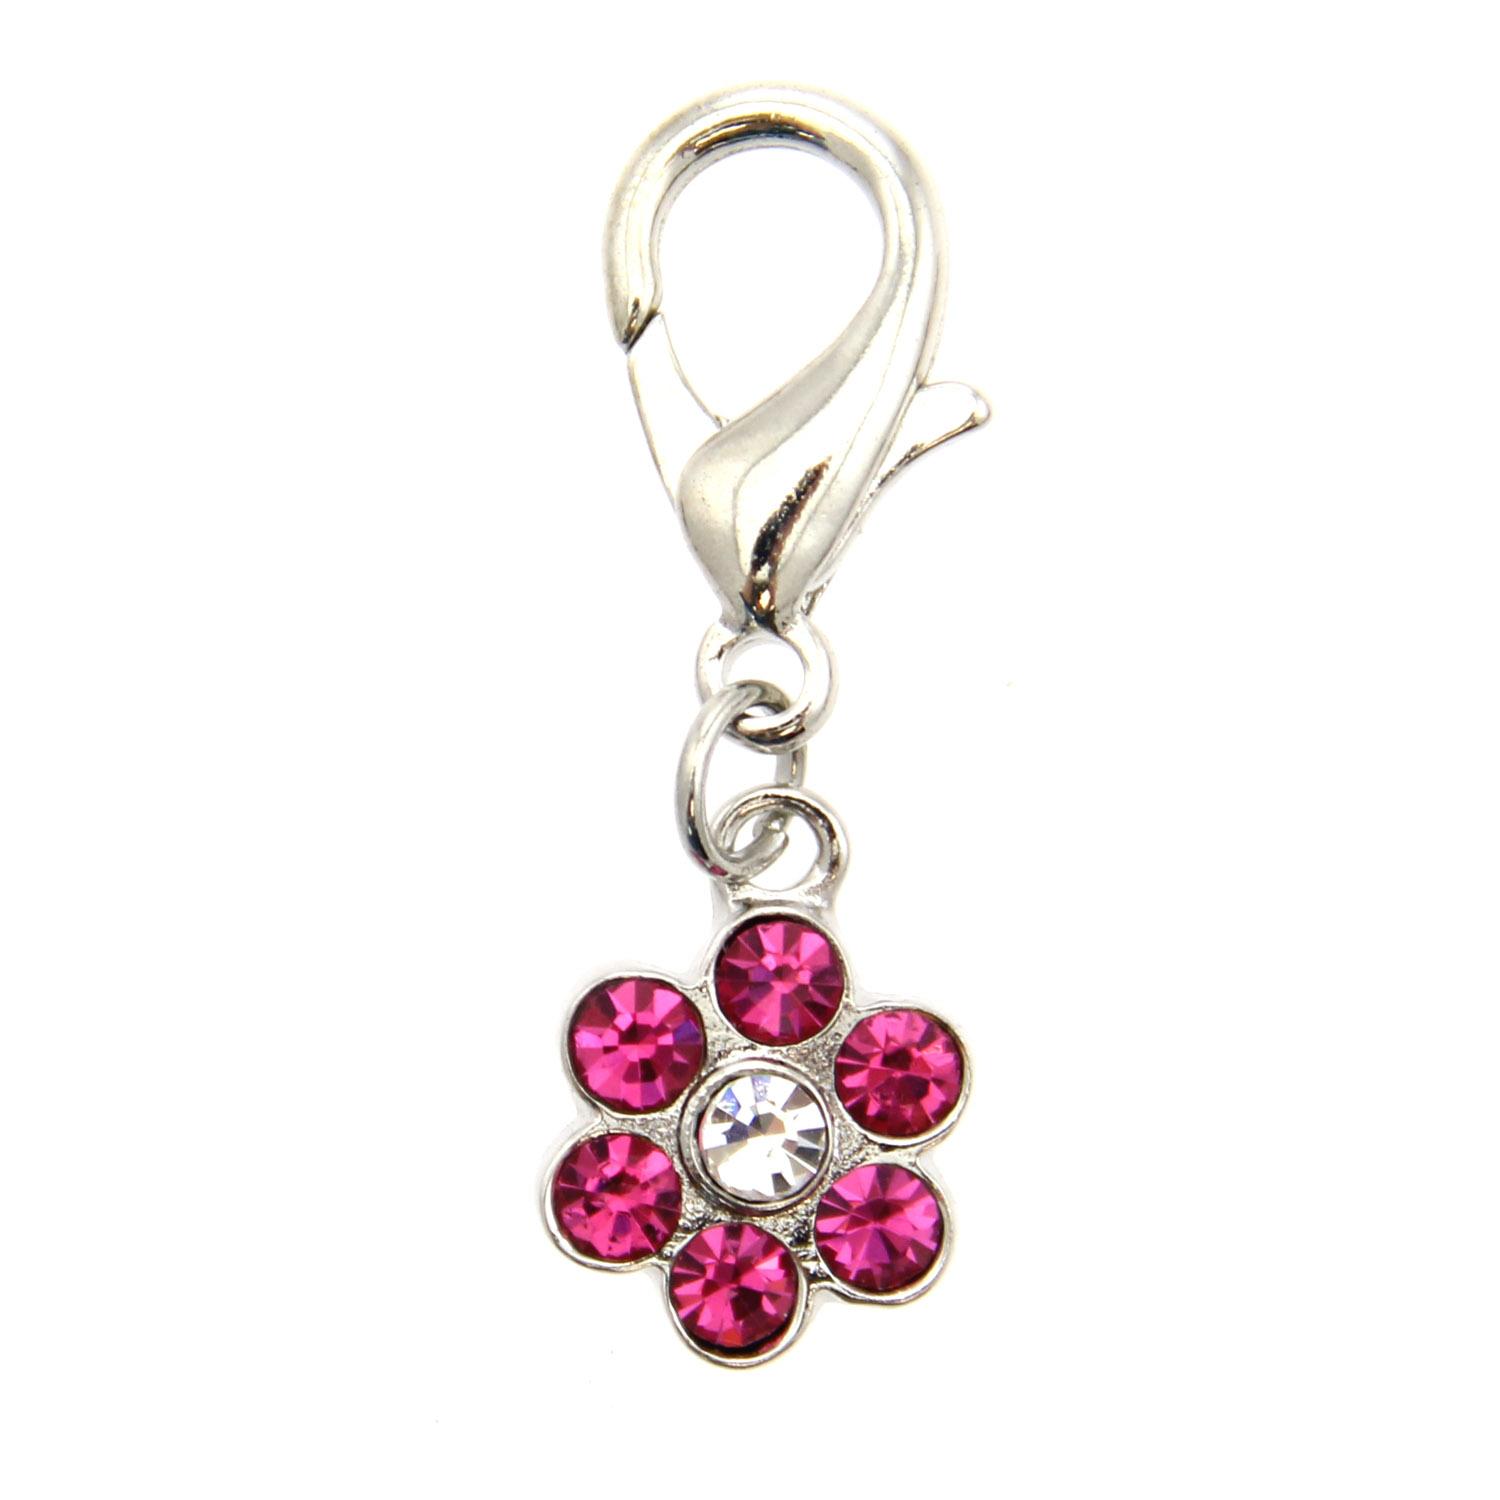 Flower D-Ring Pet Collar Charm by FouFou Dog - Pink